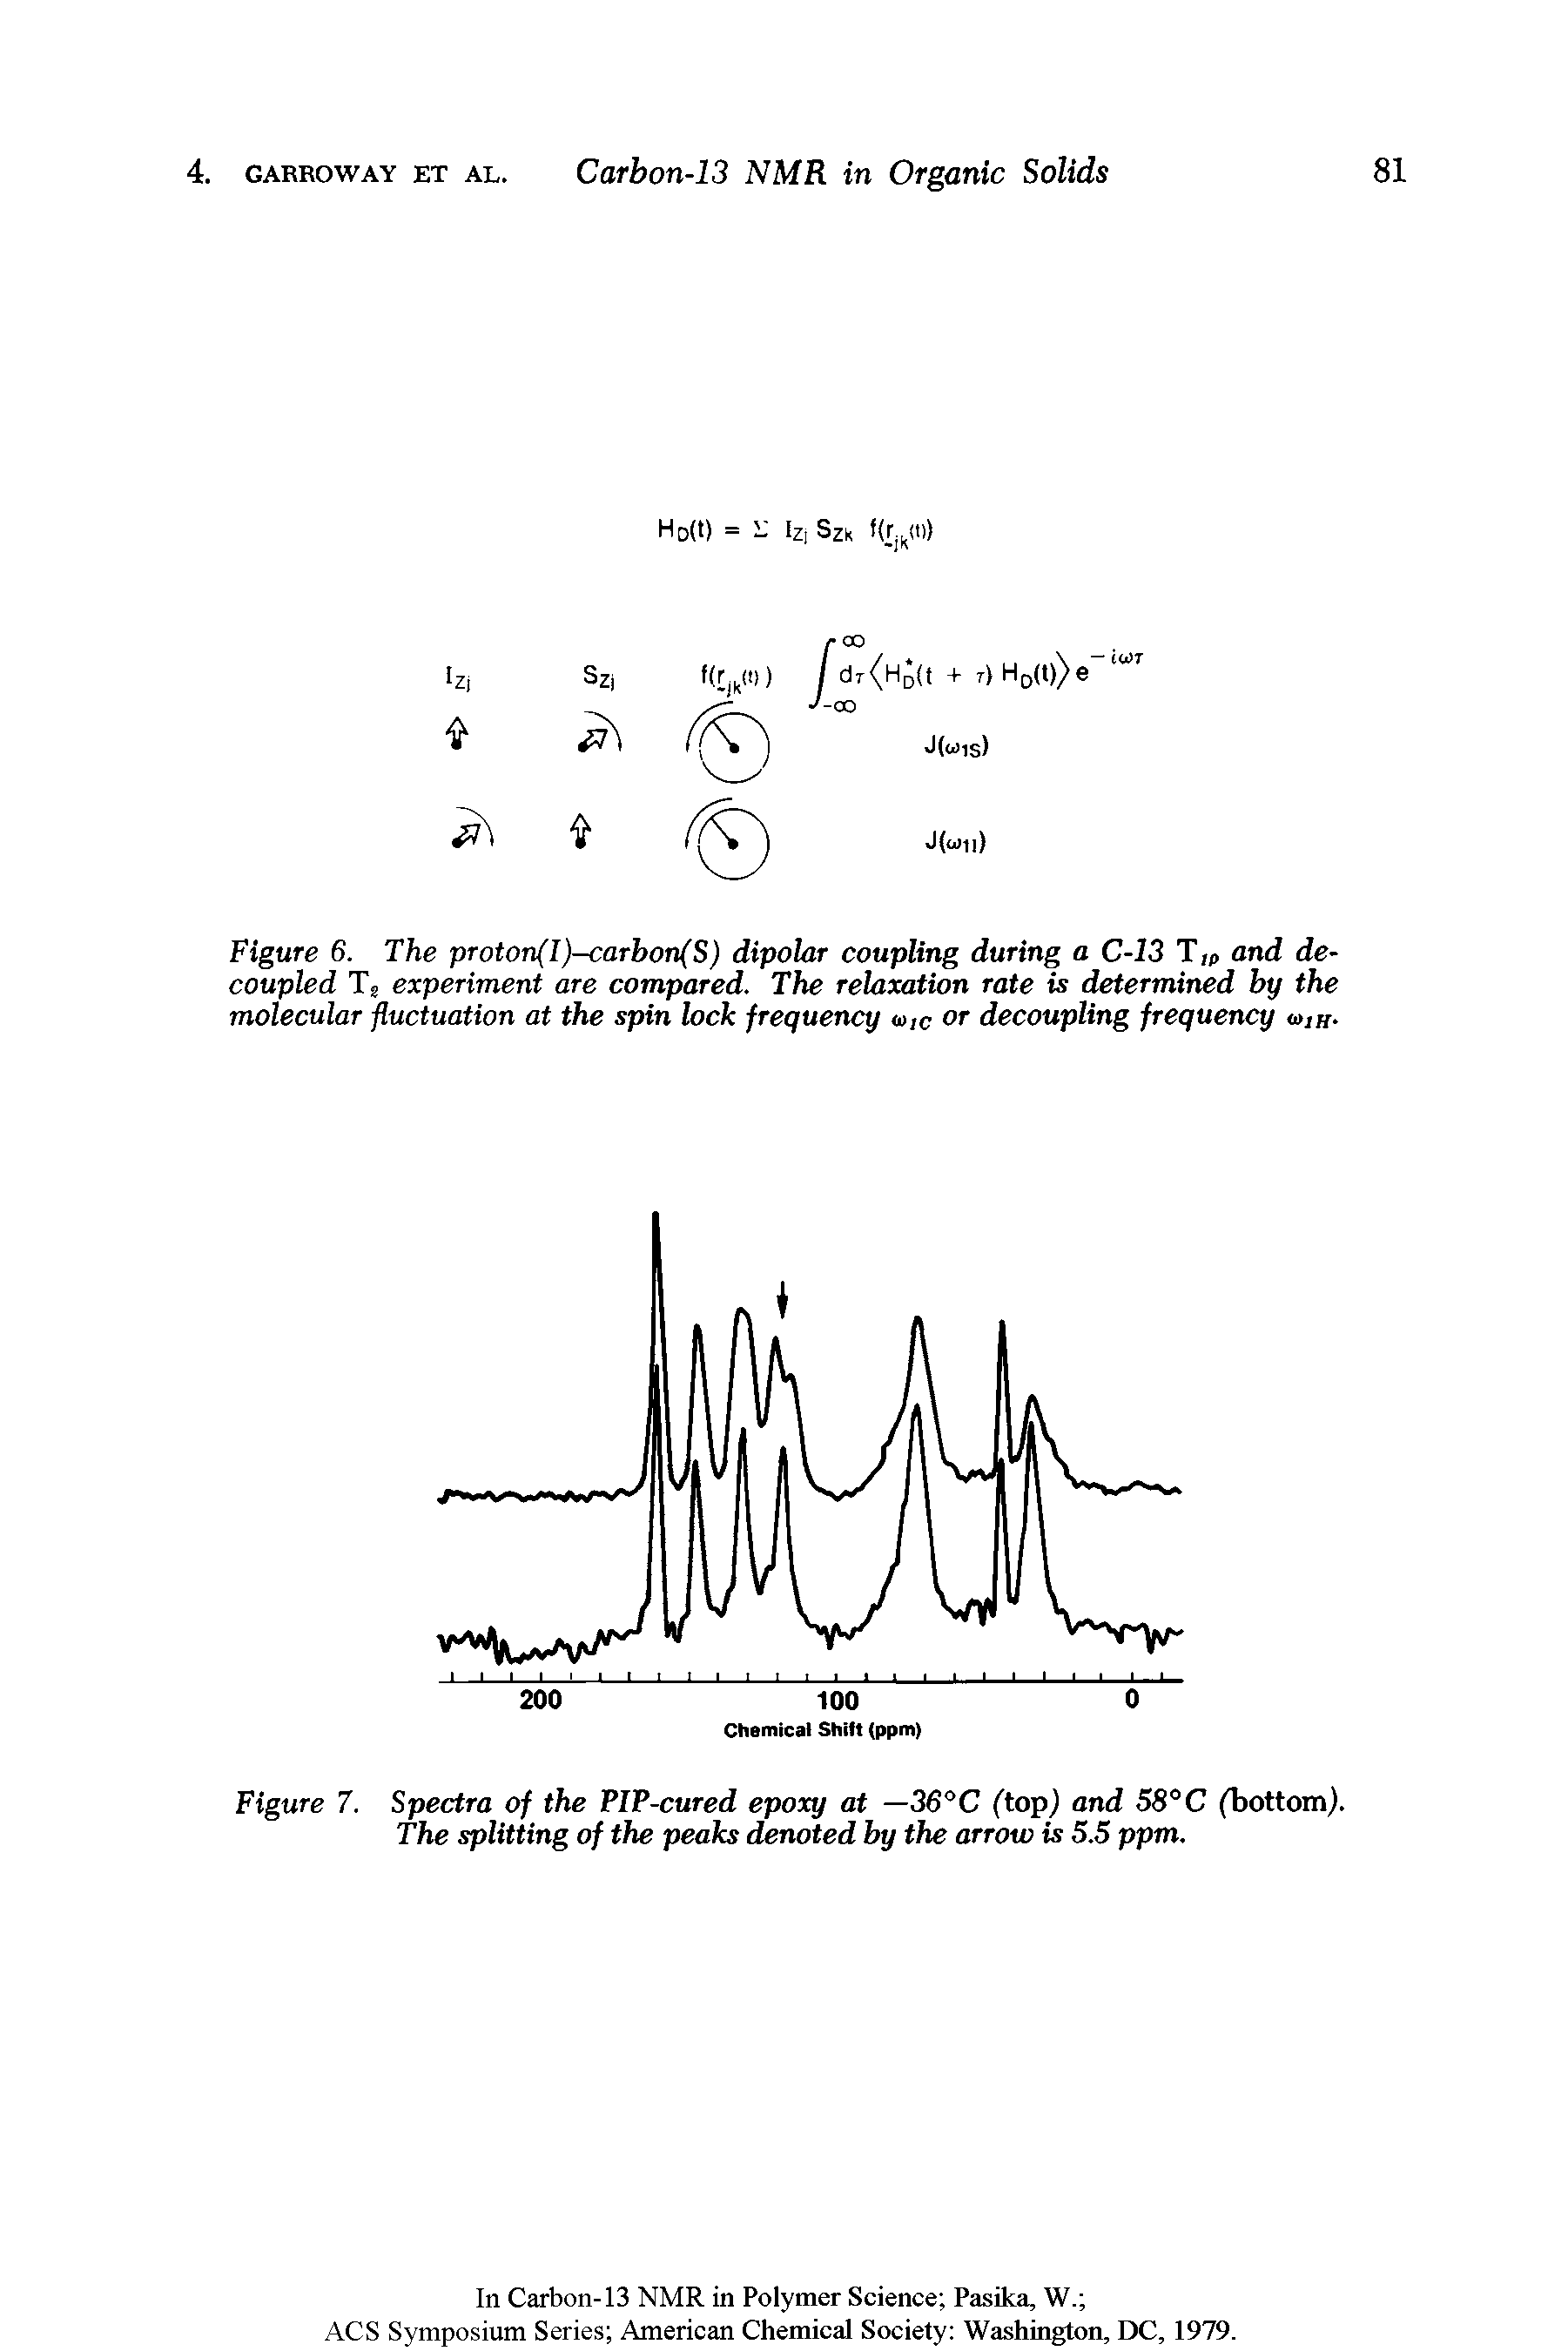 Figure 6. The proton(I)-carbon(S) dipolar coupling during a C-13 T,p and decoupled Tj experiment are compared. The relaxation rate is determined by the molecular fluctuation at the spin lock frequency u>,c or decoupling frequency a,a-...